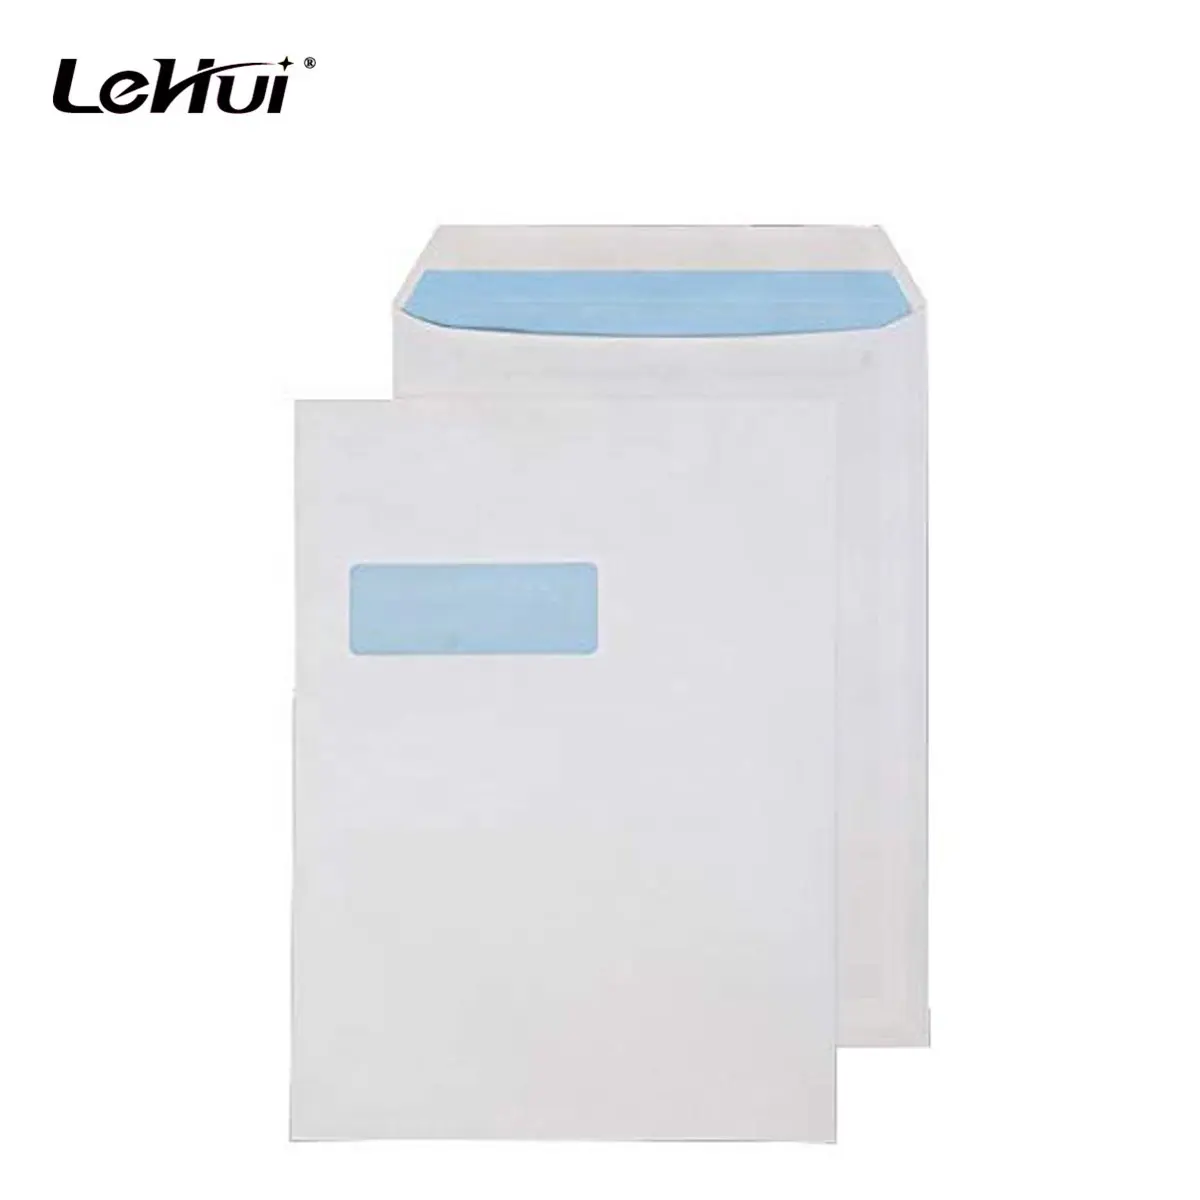 Good price Office C4 Size 229 x 324 mm 120G Pack of 250 Wide Window Wallet Envelopes With Peel & Seal